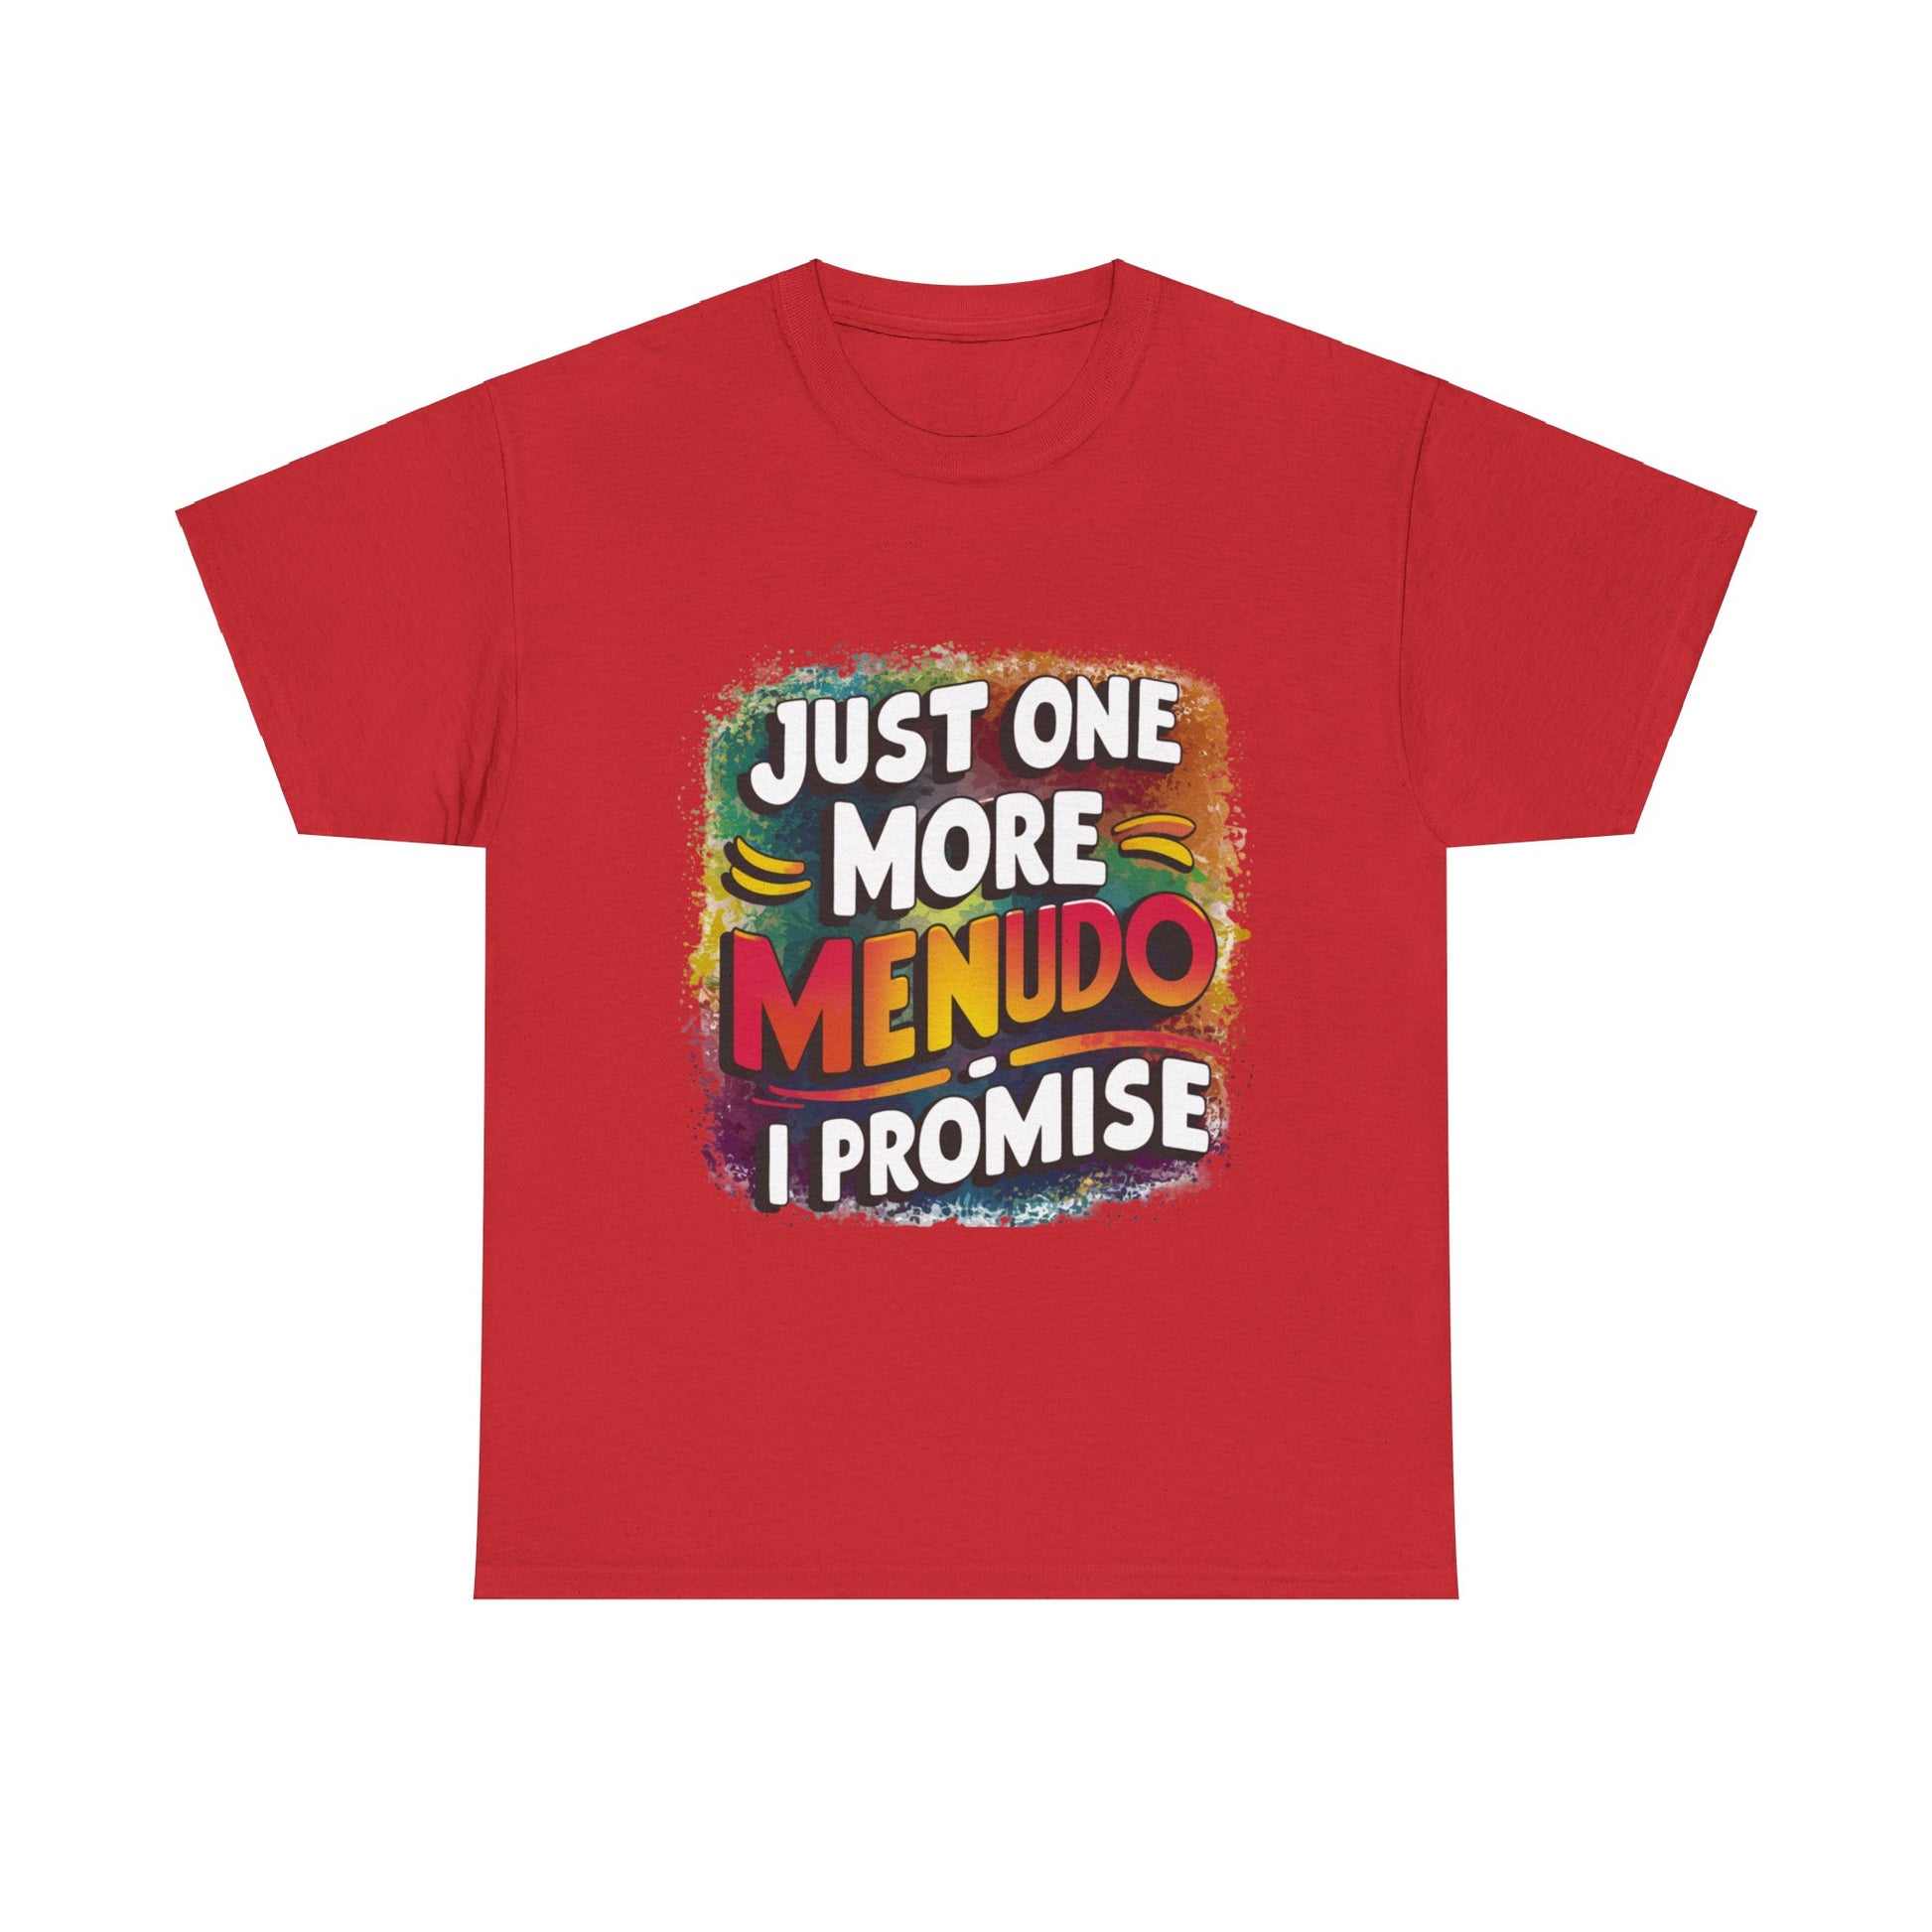 Just One More Menudo I Promise Mexican Food Graphic Unisex Heavy Cotton Tee Cotton Funny Humorous Graphic Soft Premium Unisex Men Women Red T-shirt Birthday Gift-7